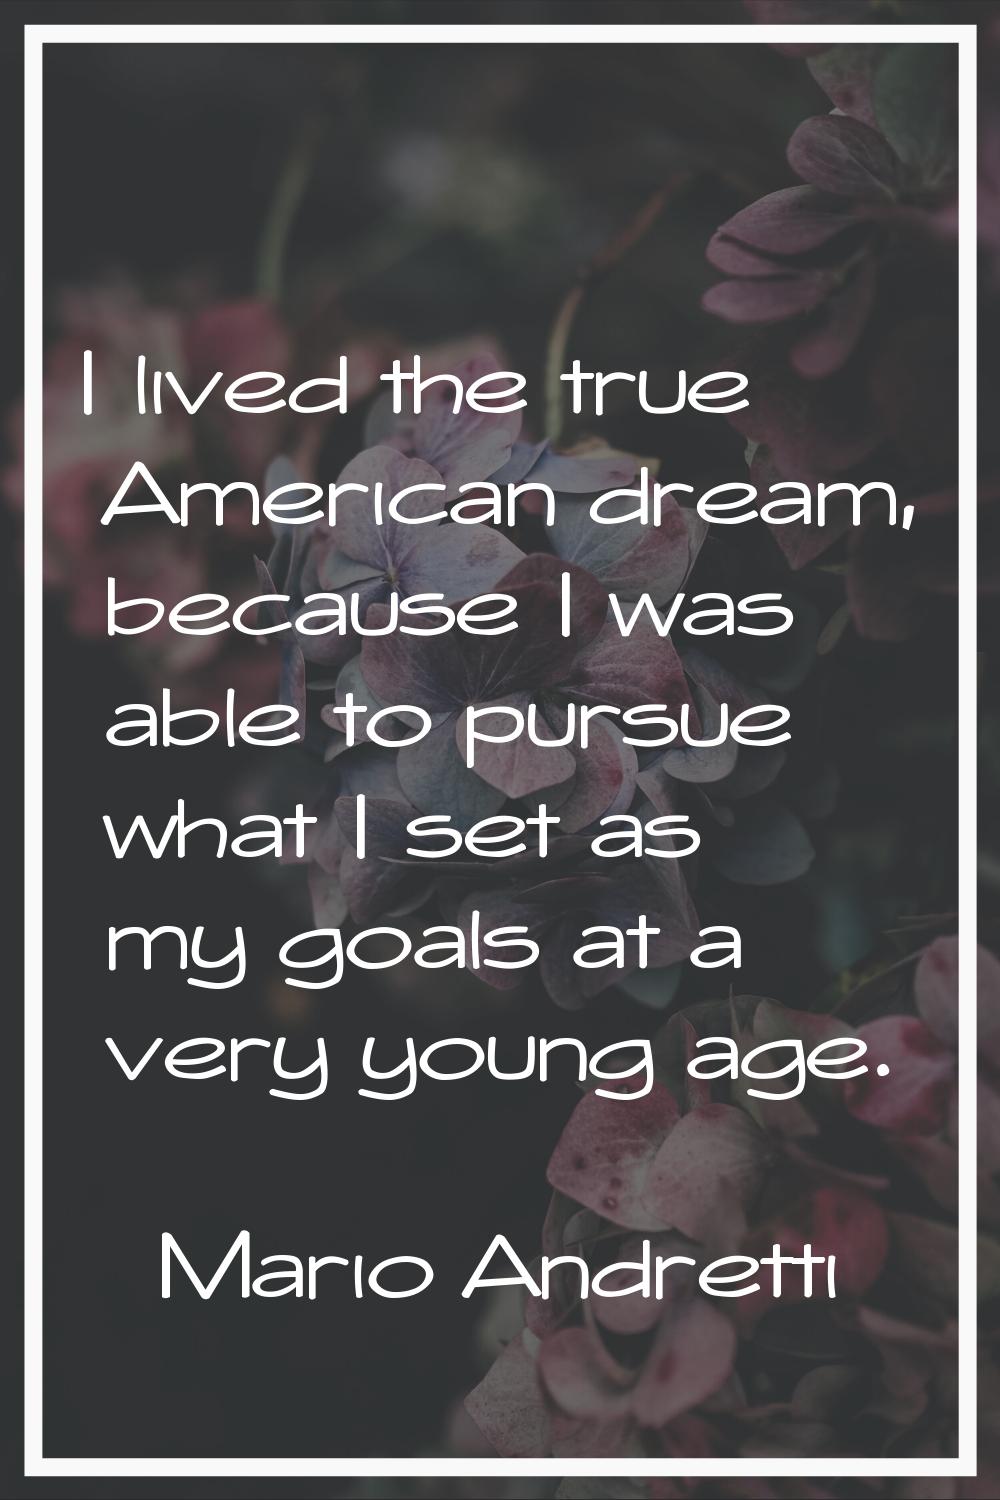 I lived the true American dream, because I was able to pursue what I set as my goals at a very youn